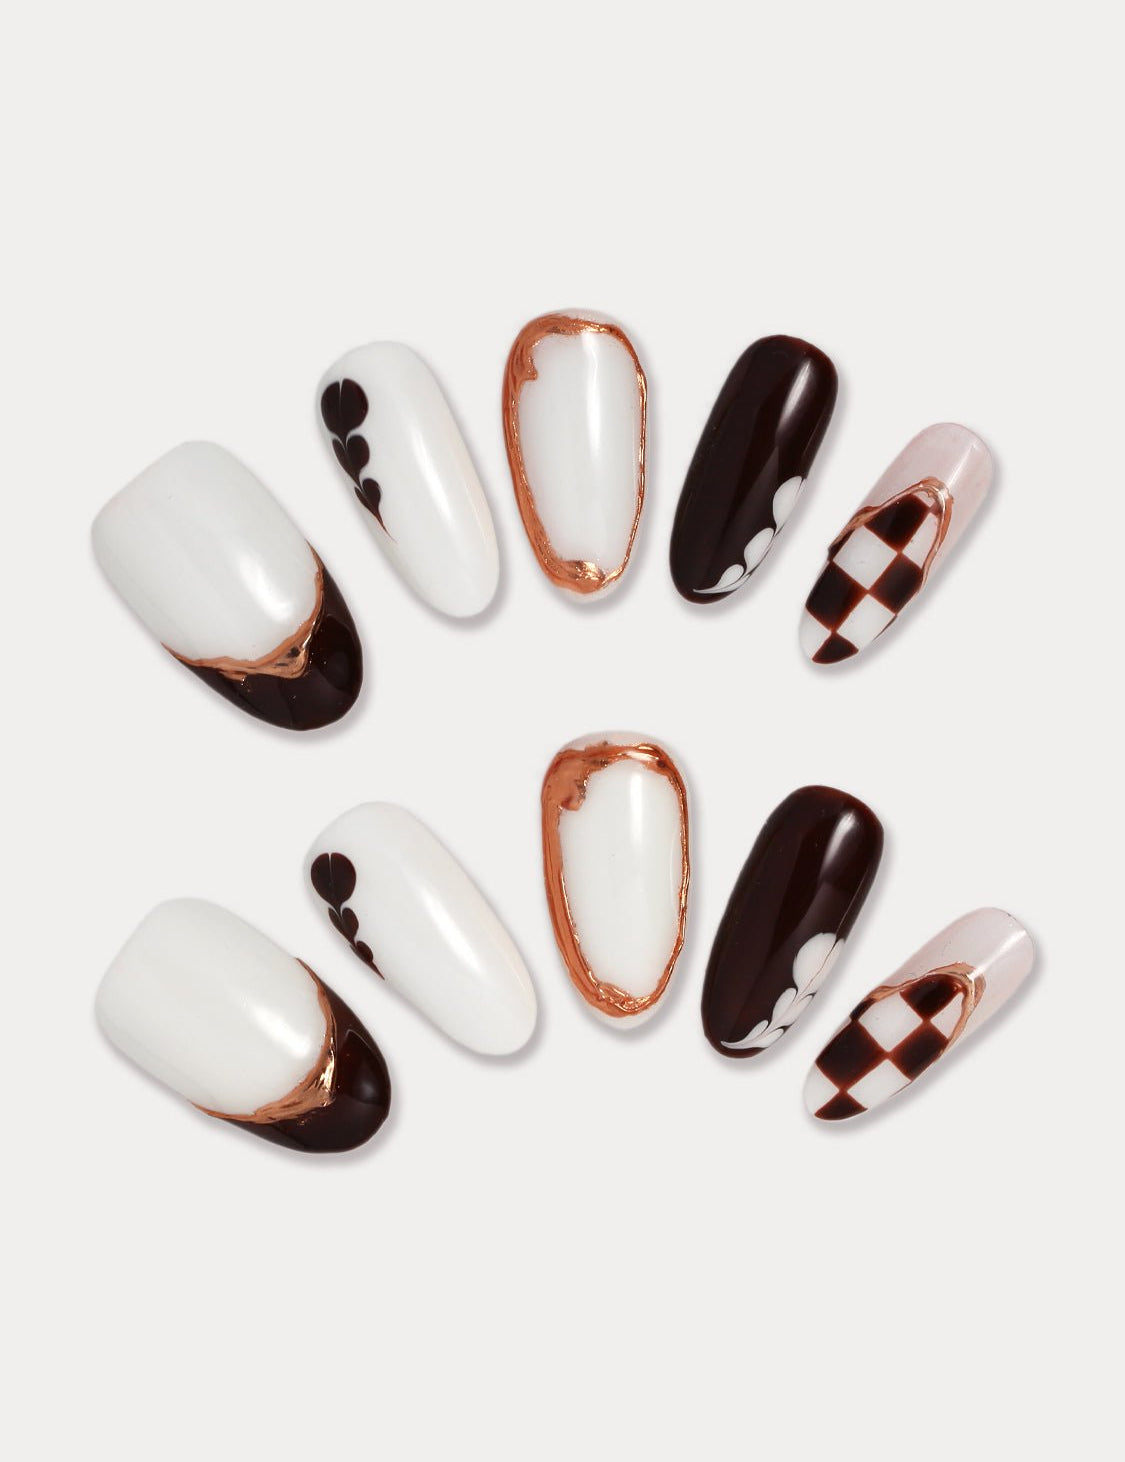 MIEAP Dark Chocolate Checkerboard press on nail set features a combination of chocolate and milk white designs. Each of the five fingers showcases a unique hand-painted nail design. The index and ring fingers are adorned with milk latte arts, creating a smooth and velvety texture. #MIEAP #MIEAPnails #pressonnail #falsenail #acrylicnail #nails #nailart #nailinspo #handmadenail #winternail #nail2023 #graduationnail #shortnail #ovalnail #whitenail